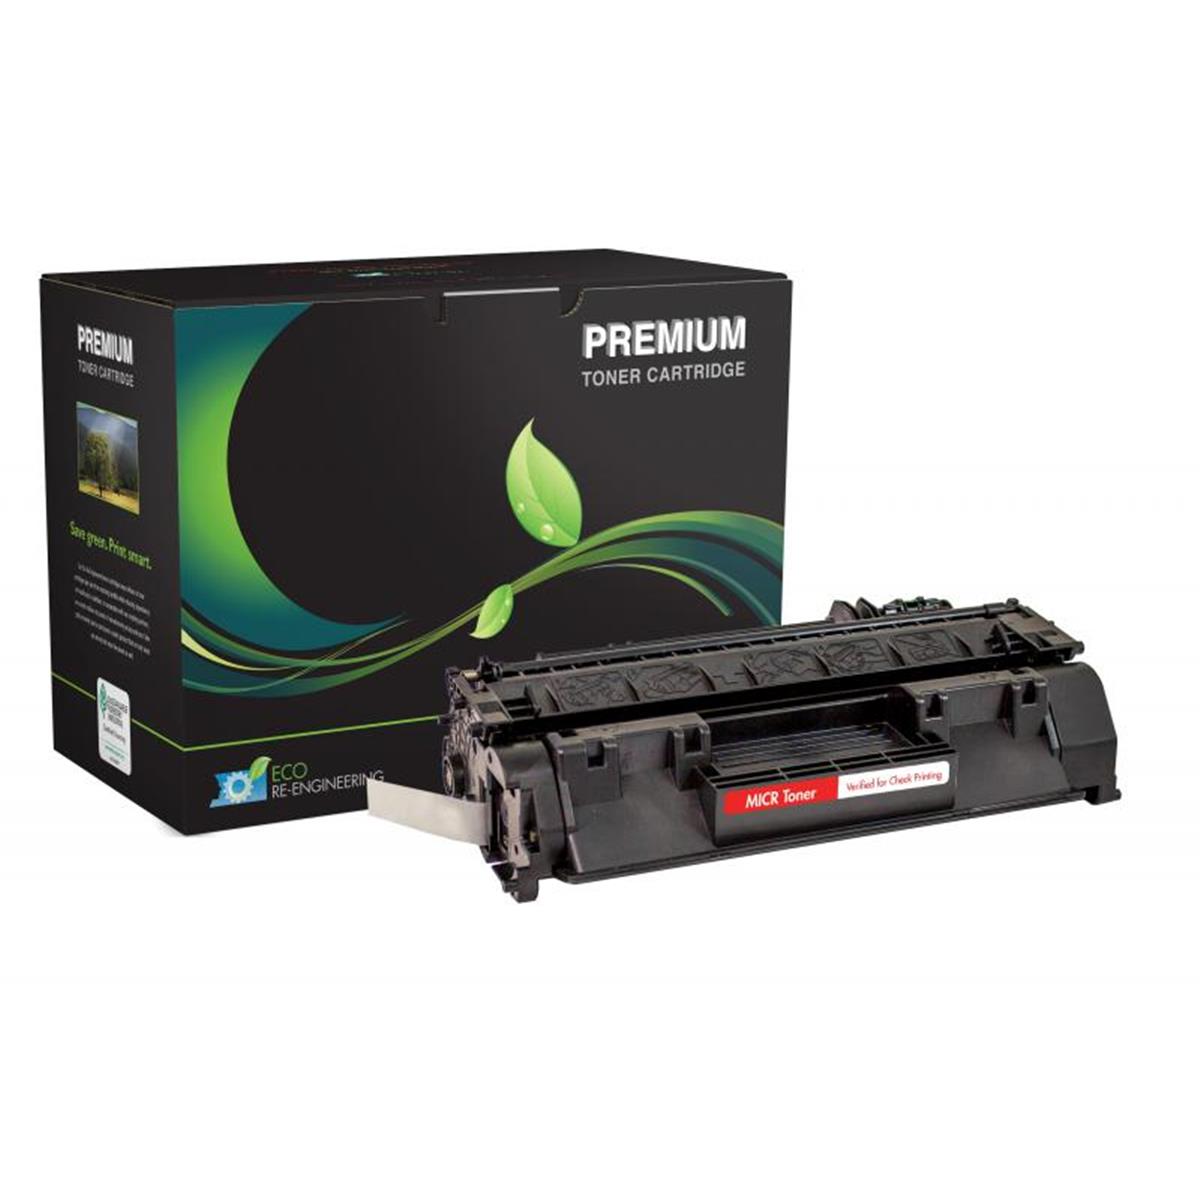 Picture of MSE MSE02210515 Black MICR Toner Cartridge for HP CE505A, TROY 02-81500-001